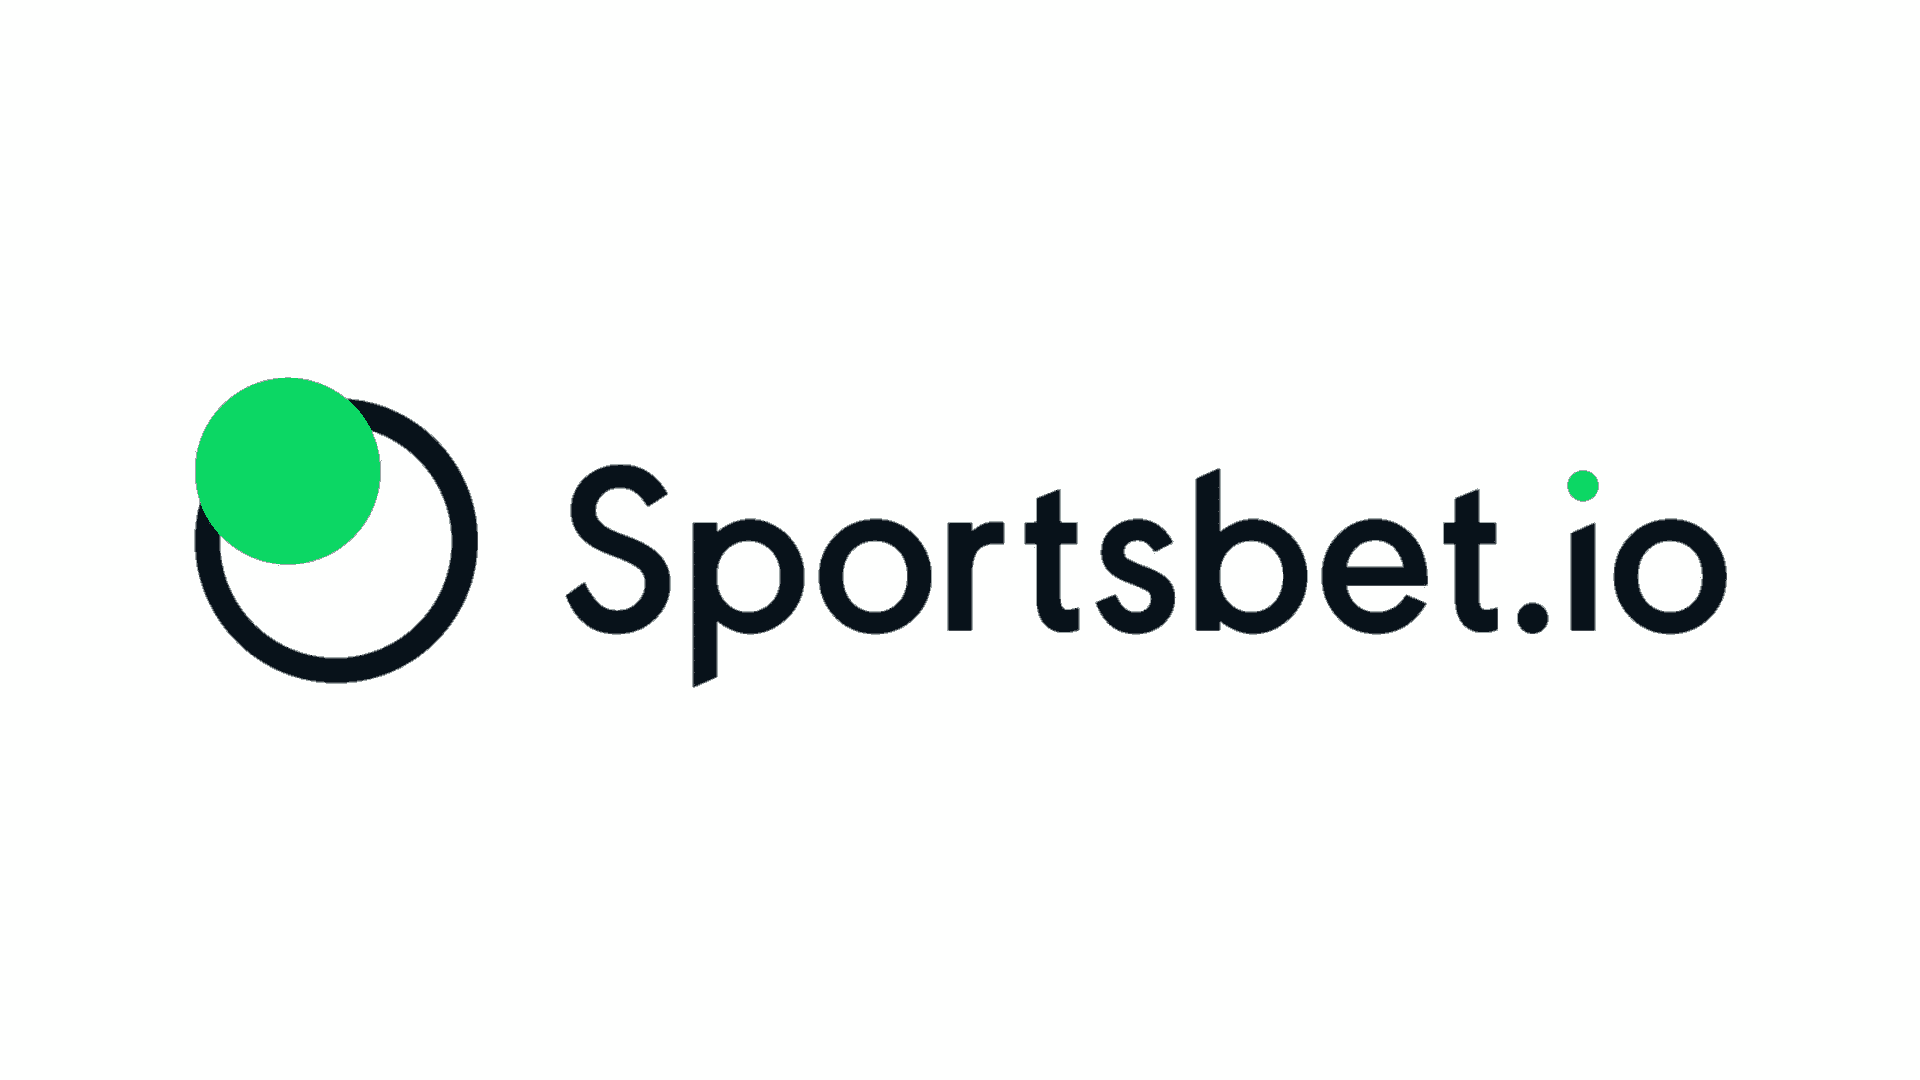 Sportsbet.io to Launch a Campaign to Raise Bitcoin Awareness